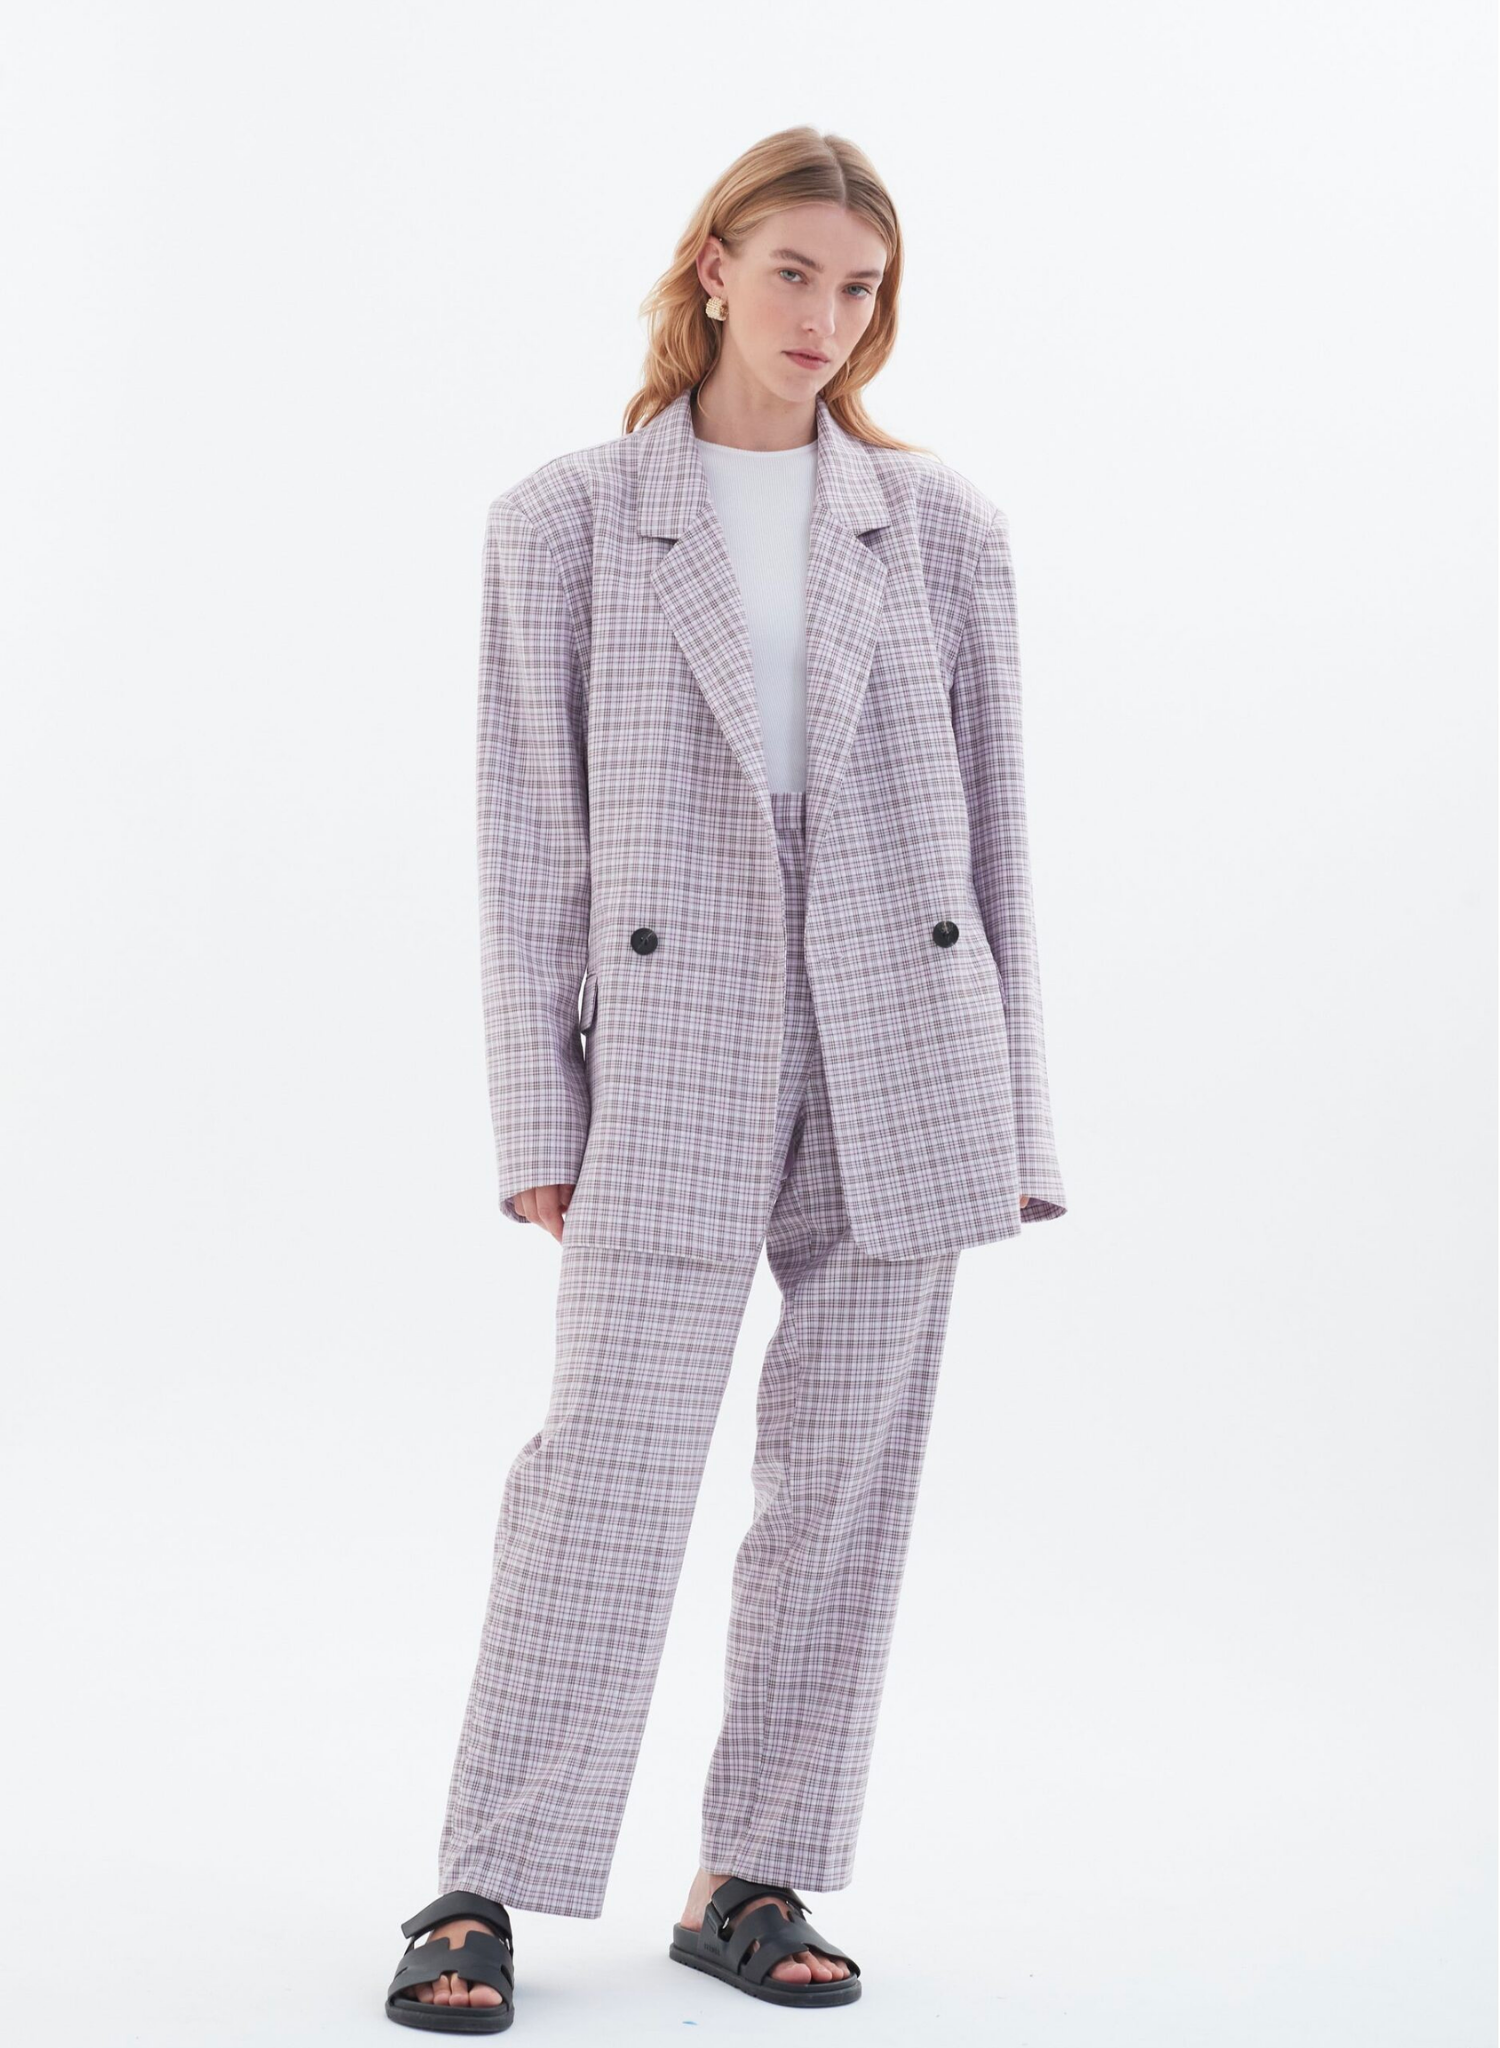 The Jamie Pants made from a cotton blend for comfort features the perfect vintage inspired check, pocket details with button closures, generous belt loops and a relaxed fit leg.